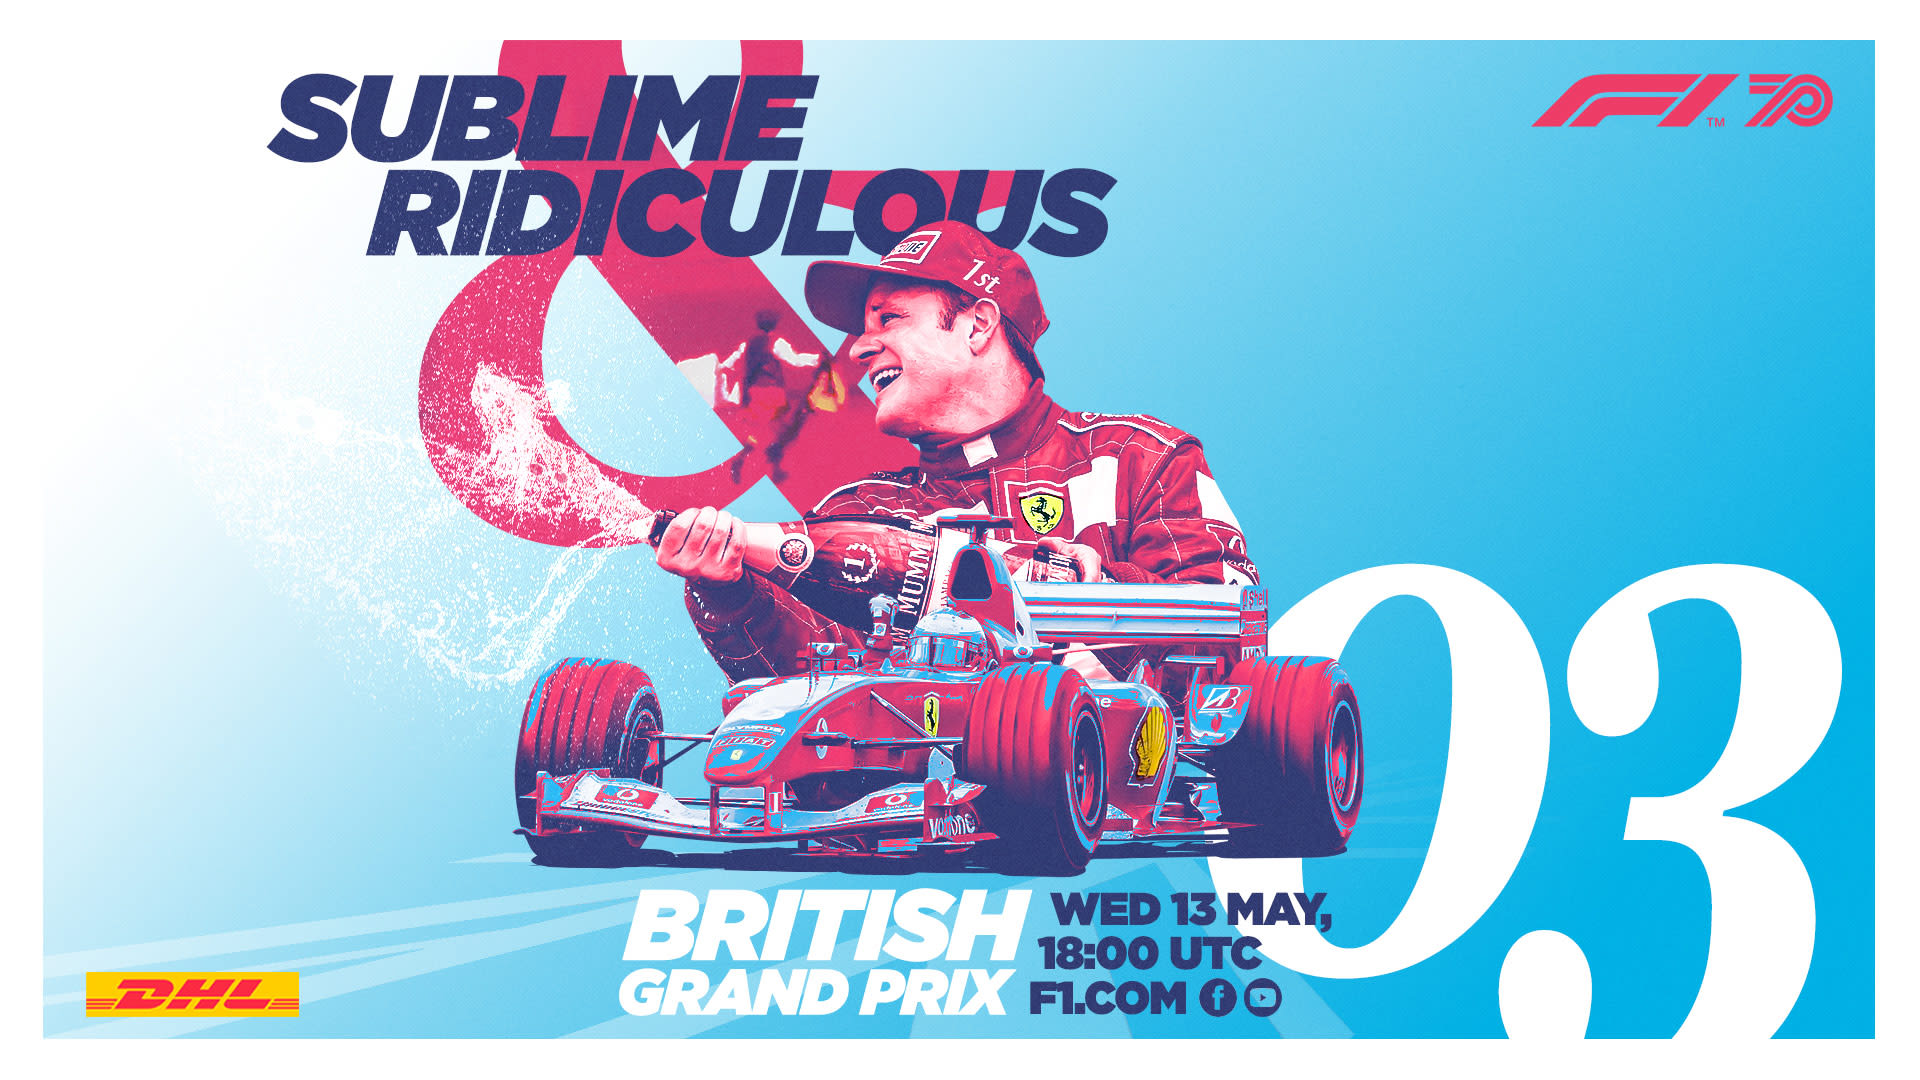 WATCH LIVE Join our stream of the 2003 British Grand Prix as we celebrate F1s 70th anniversary Formula 1®